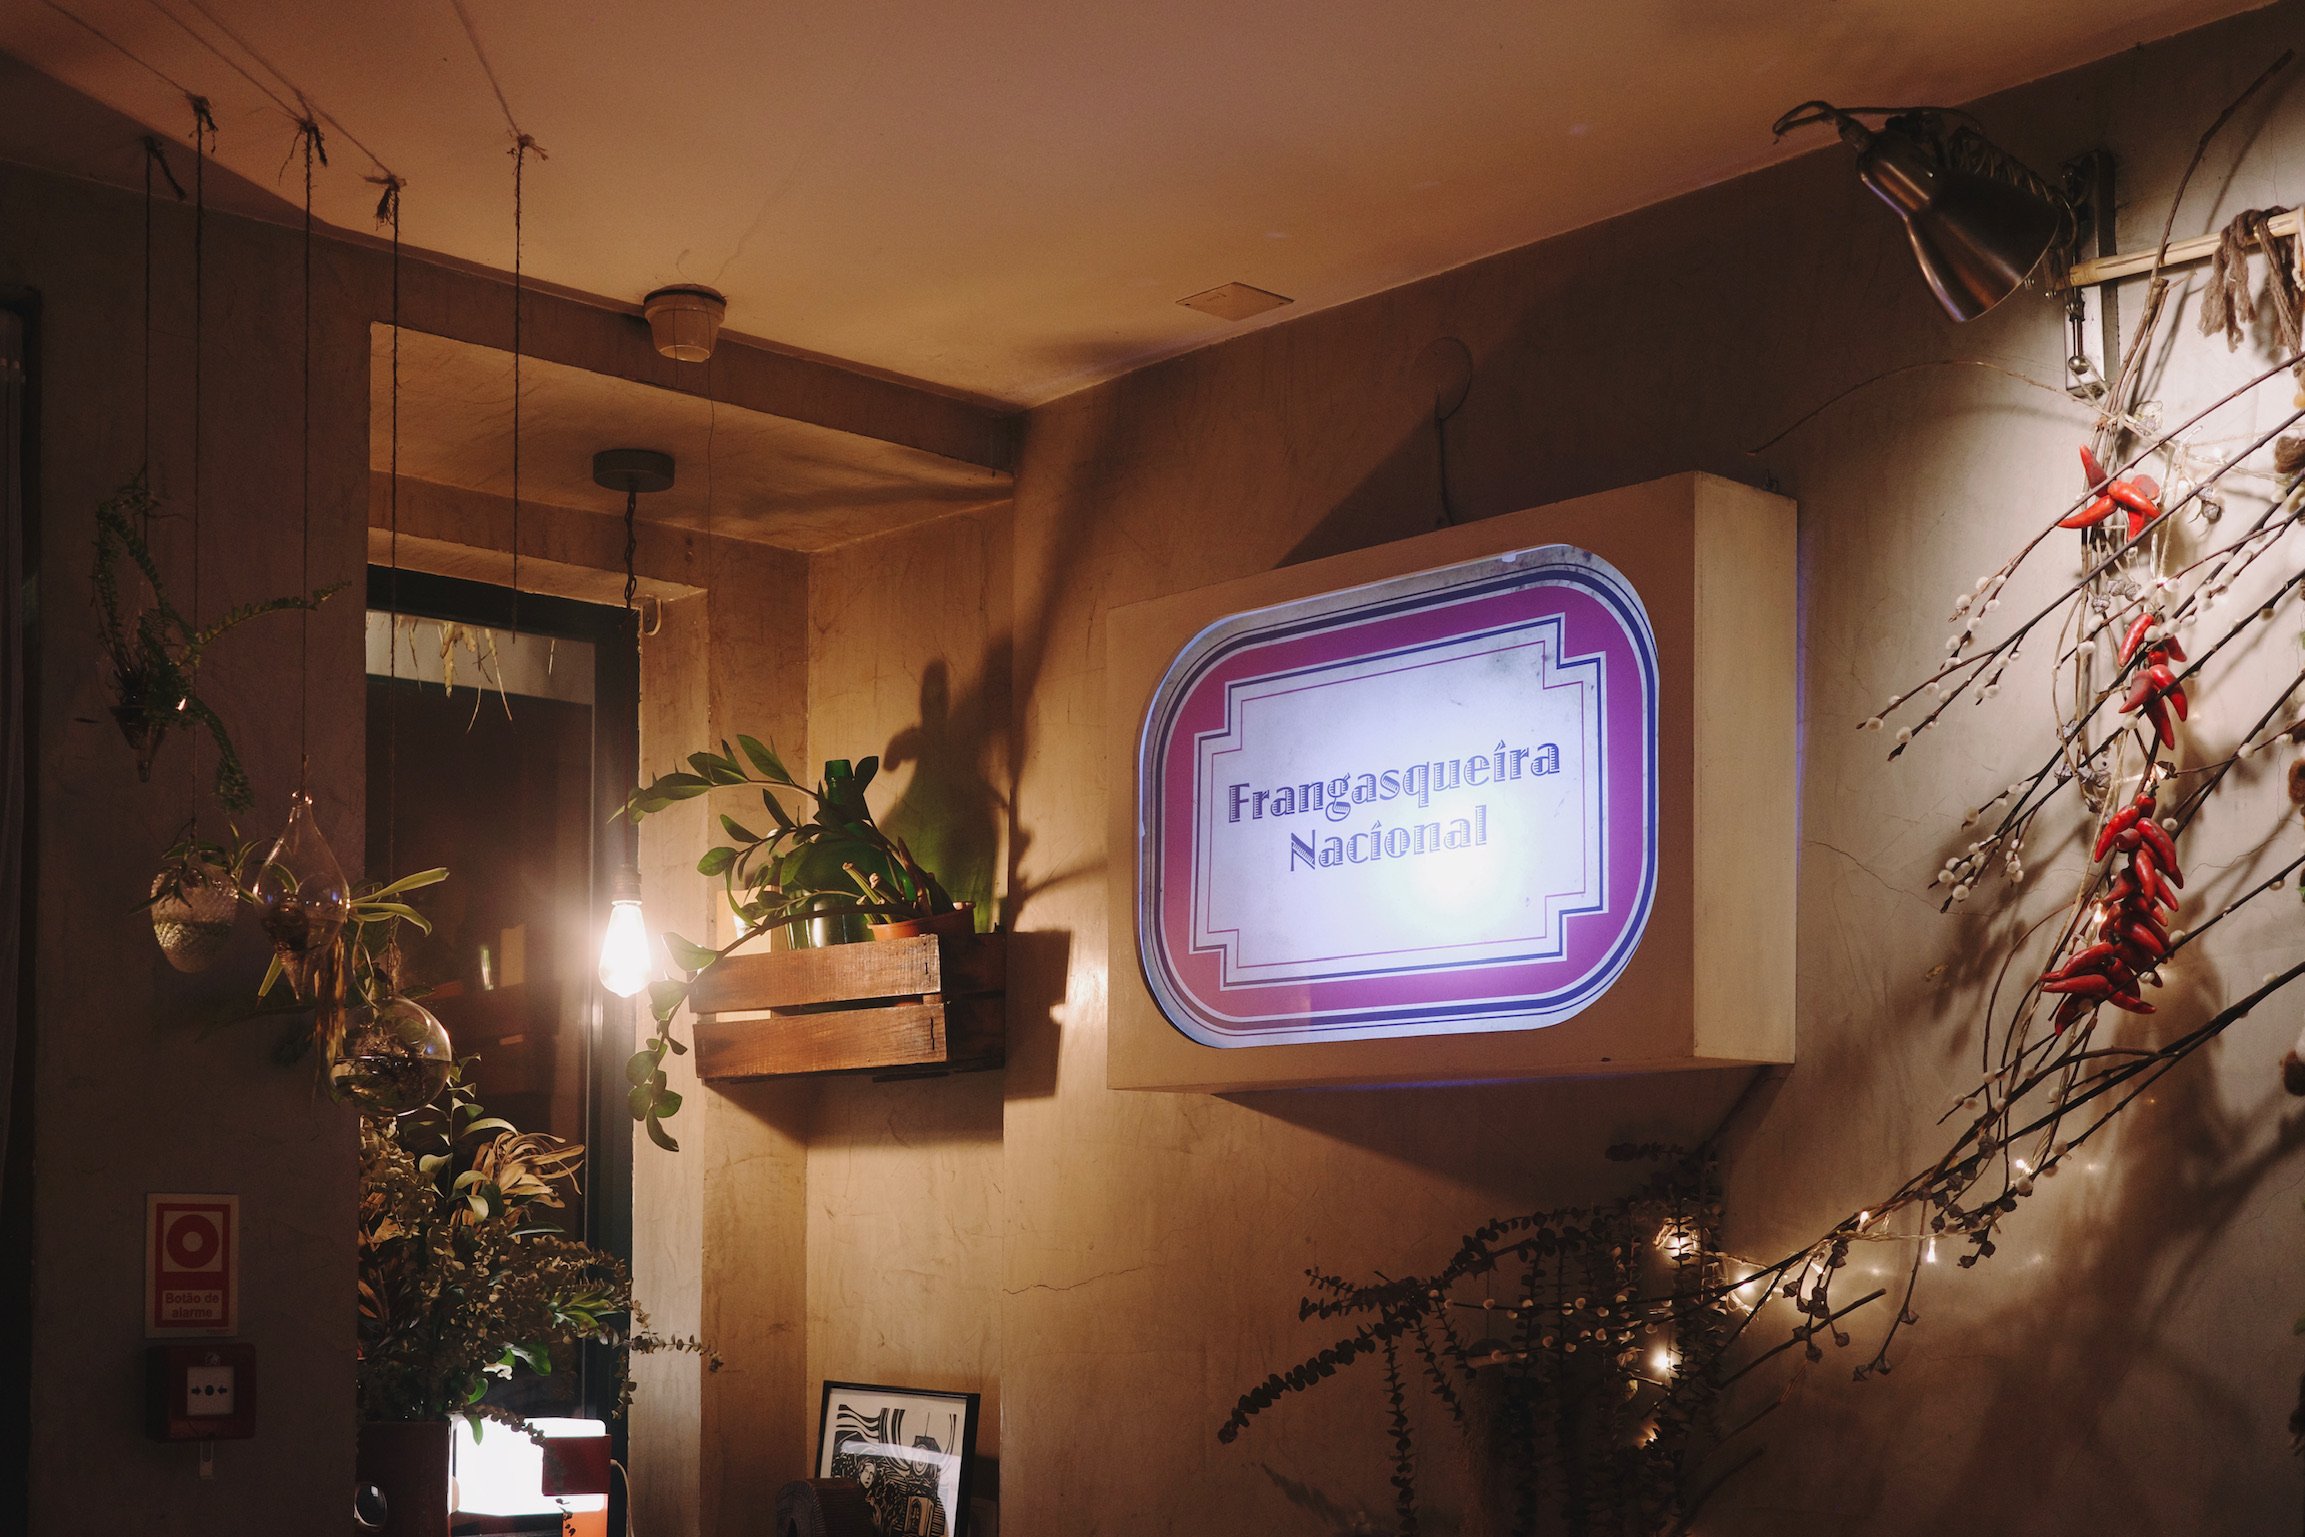 A light box that says Frangasqueira Nacional on a wall in a restaurant with plants and artwork as decorations.